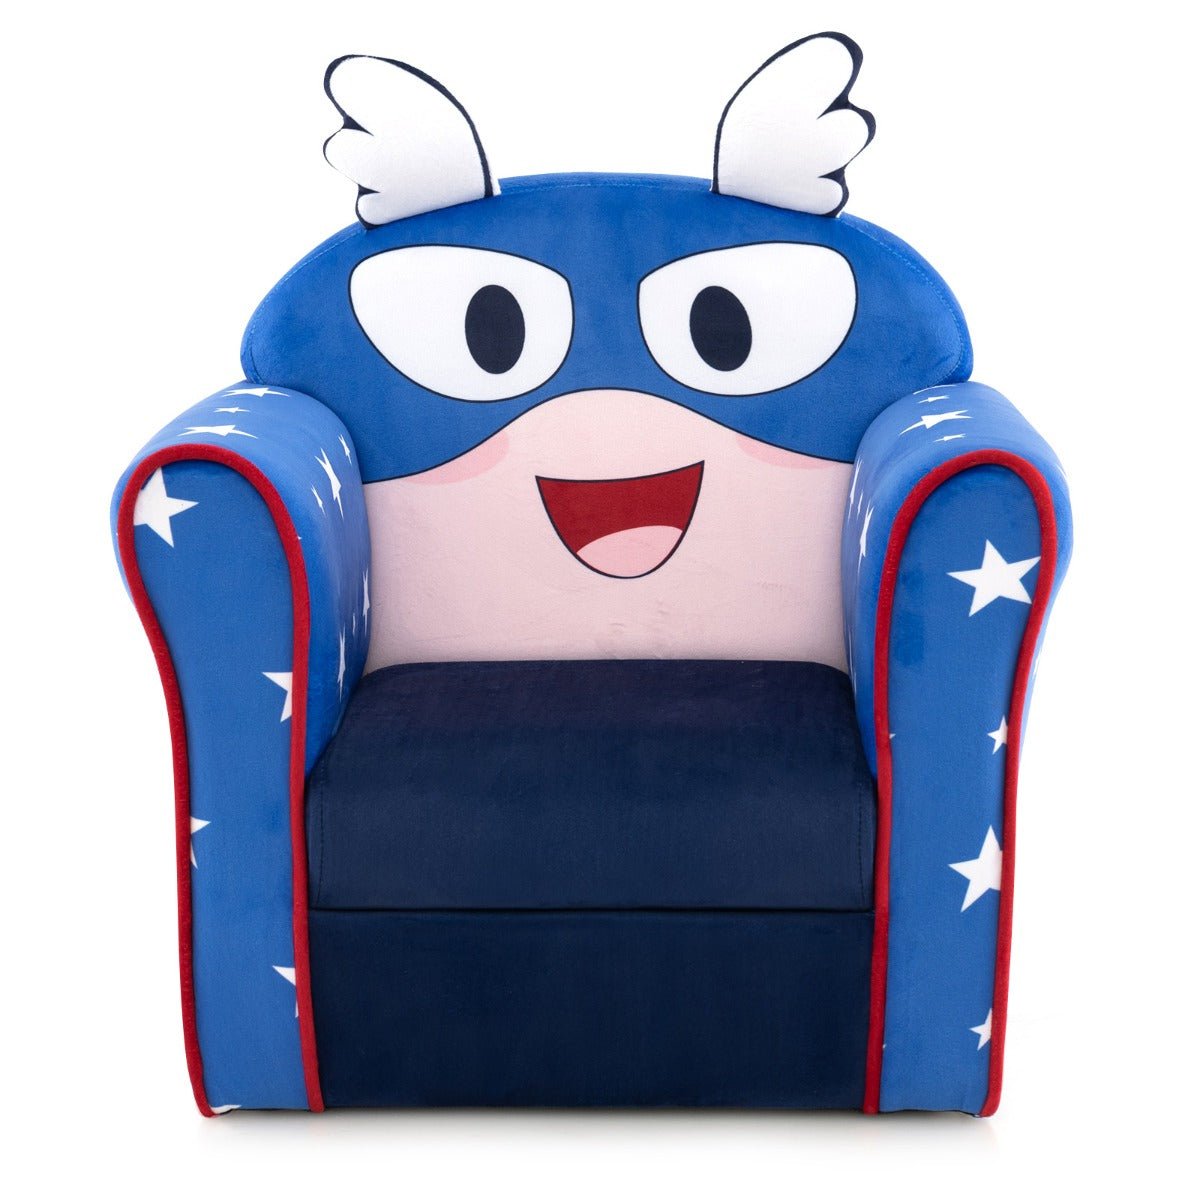 Kids Upholstered Armchair with Cute Cartoon Pattern for 0-5 Years-Navy